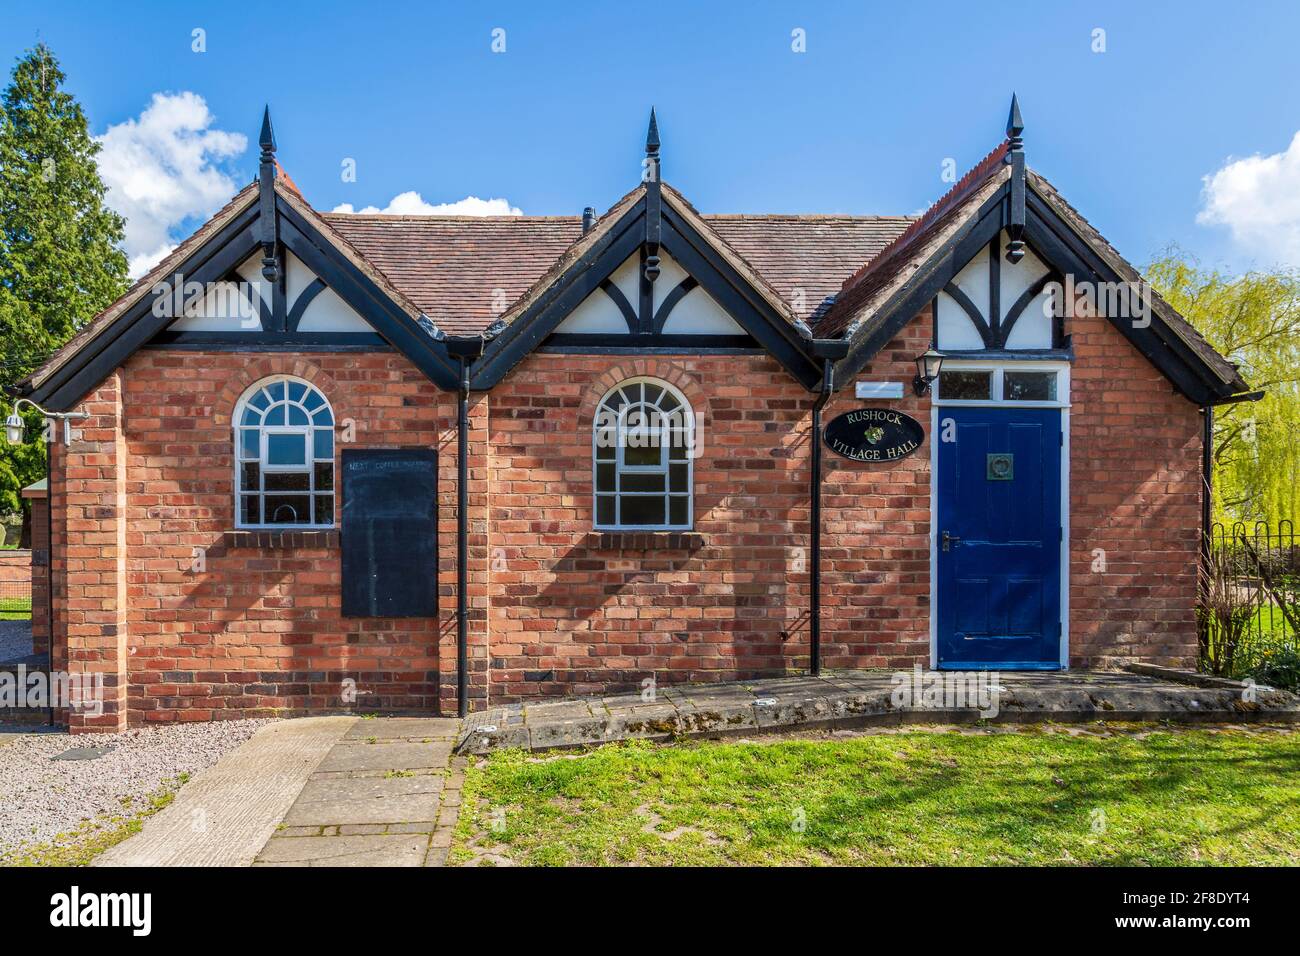 Village Hall in Rushock near Droitwich, Worcestershire, England. Stock Photo